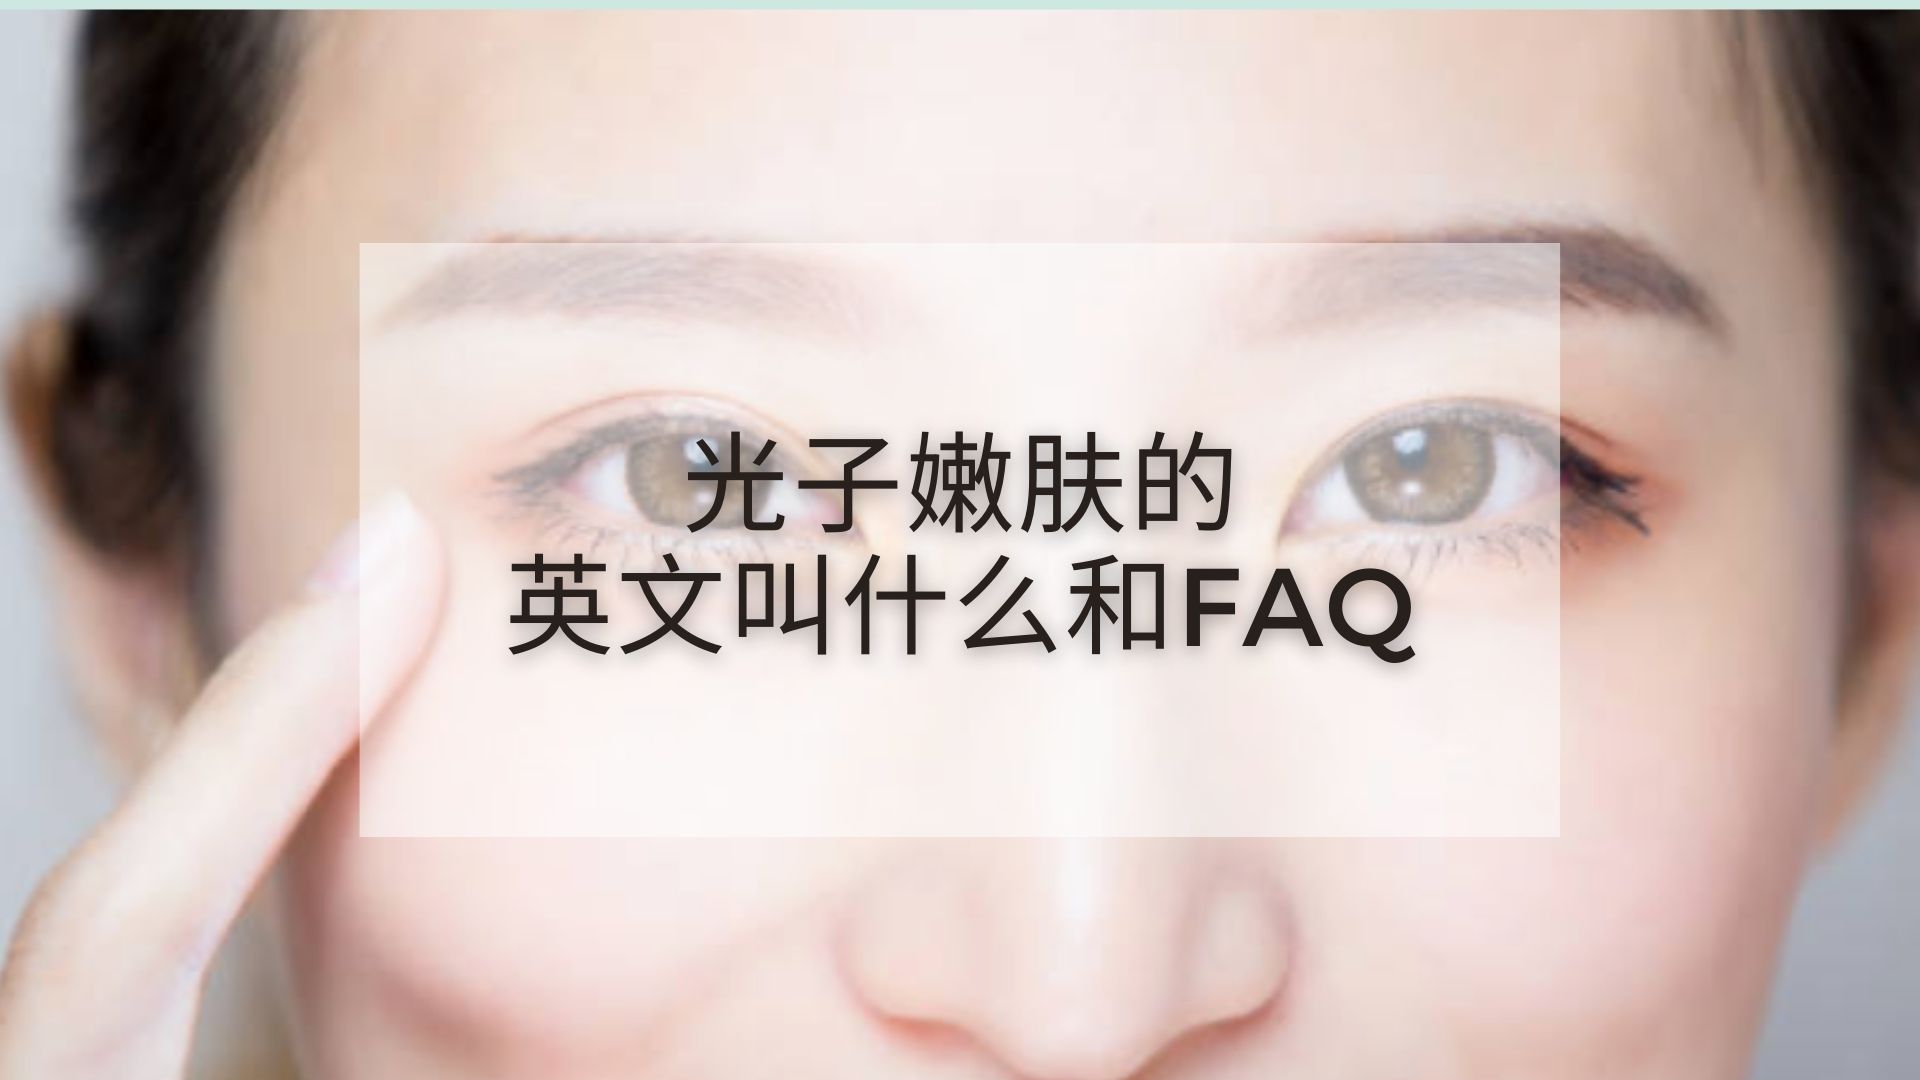 You are currently viewing 光子嫩肤的英文叫什么和FAQ